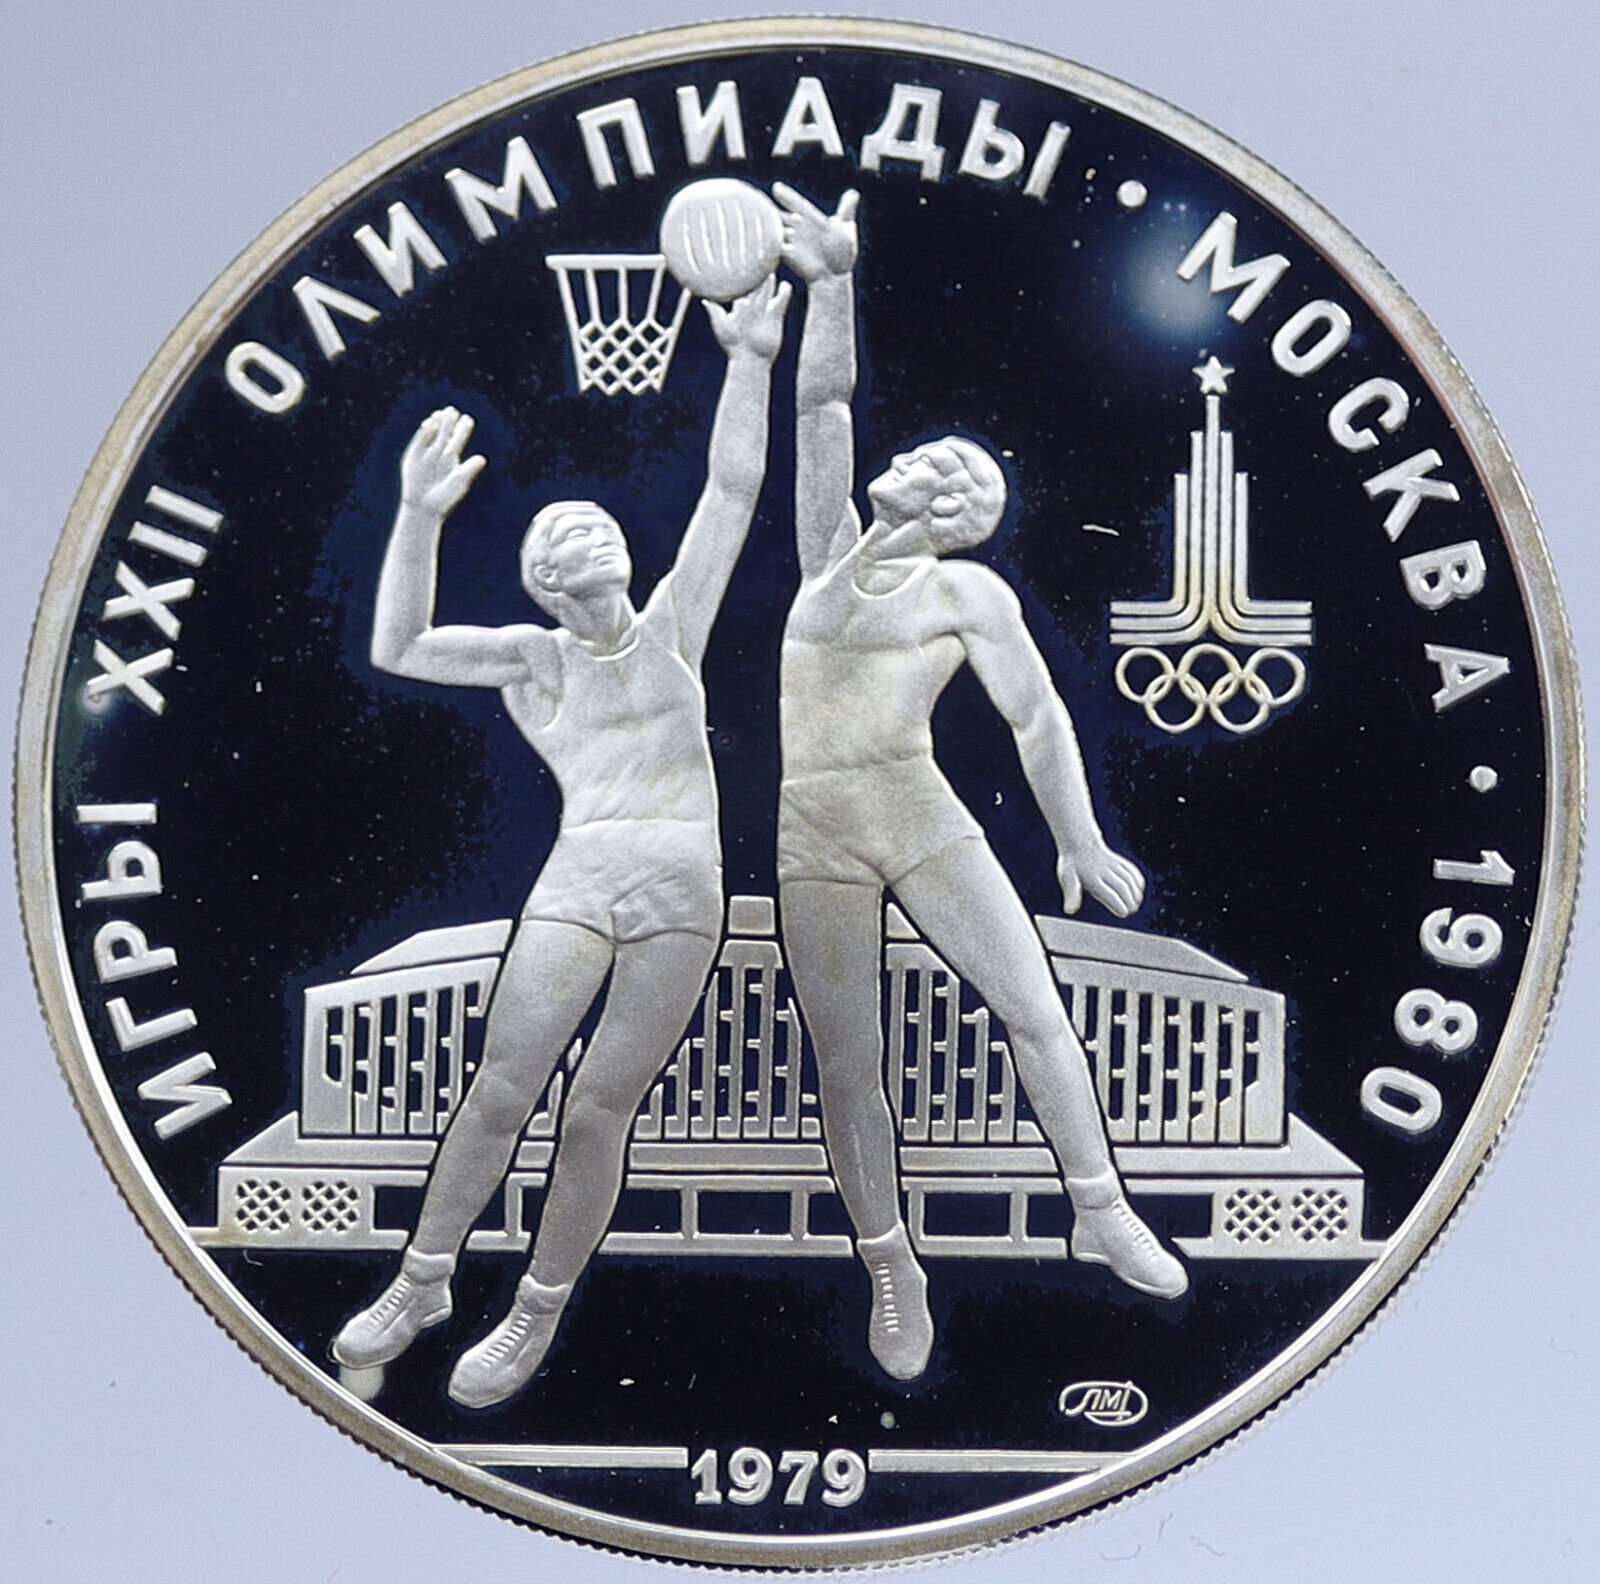 1980 MOSCOW Summer Olympics 1979 BASKETBALL Proof Silver 10 Ruble Coin i118939